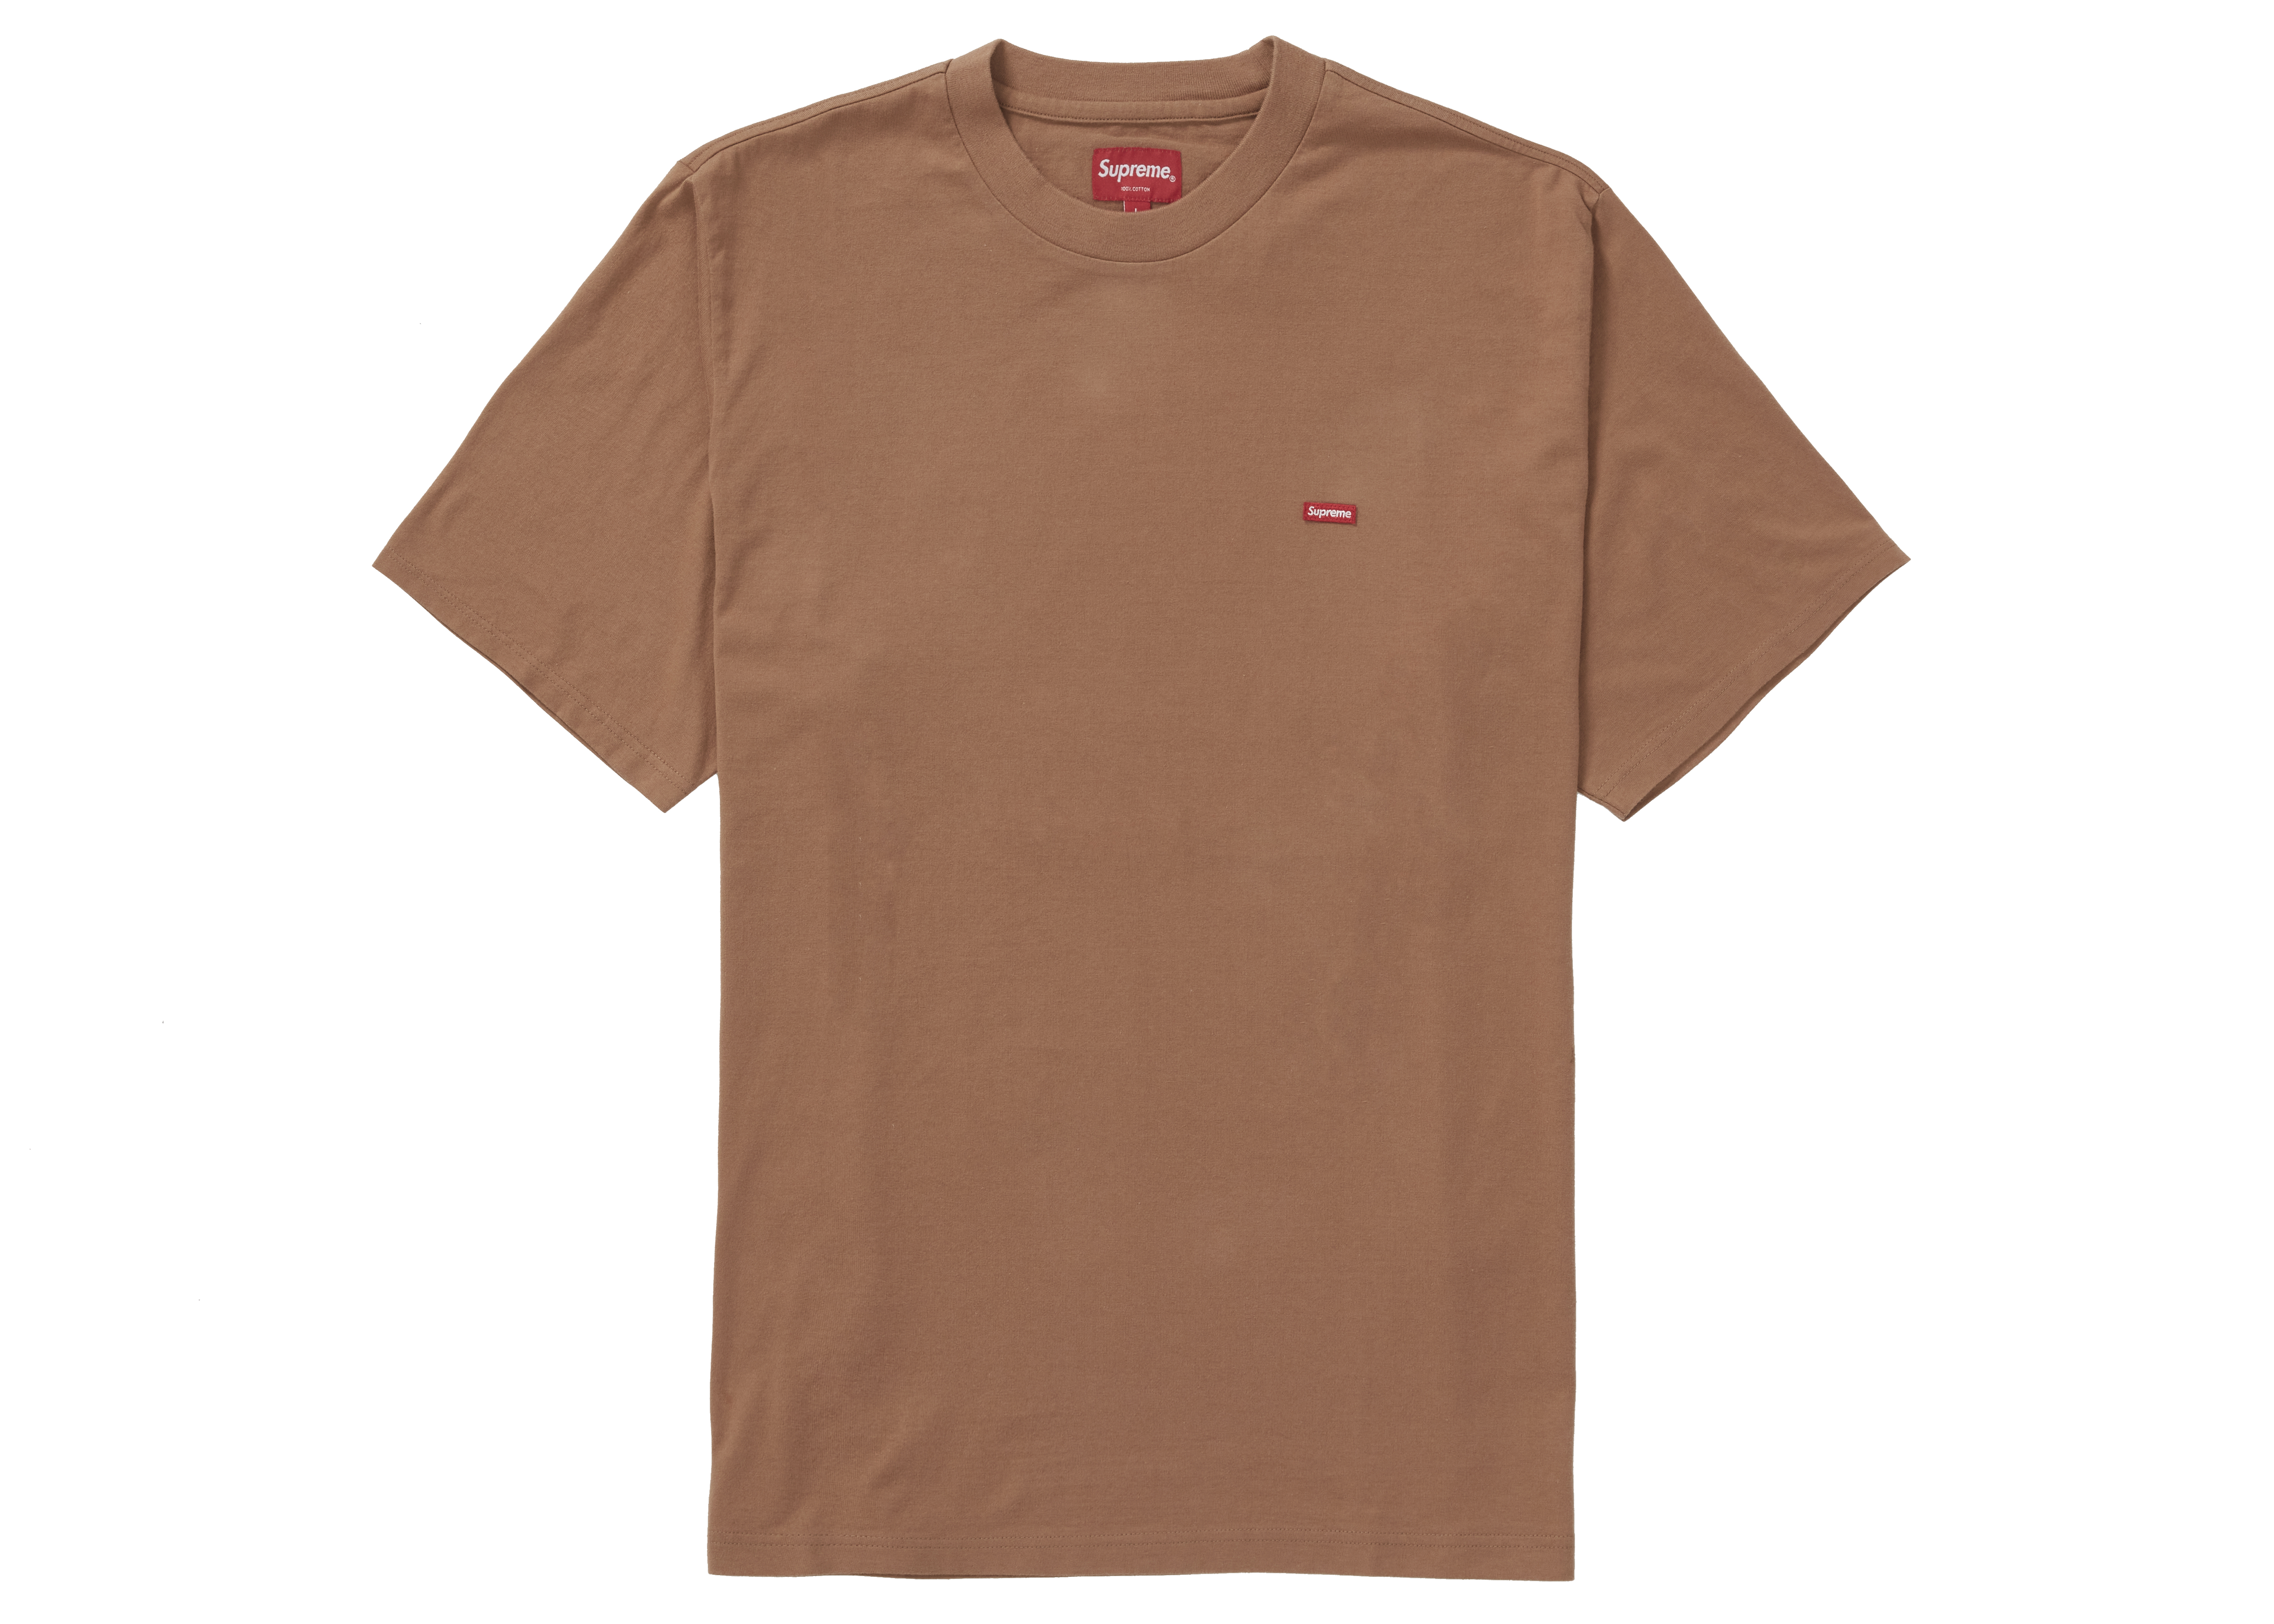 AUTHENTIC IN HAND BROWN SIZE LARGE FW21 WEEK 1 SUPREME SMALL BOX S/S TEE